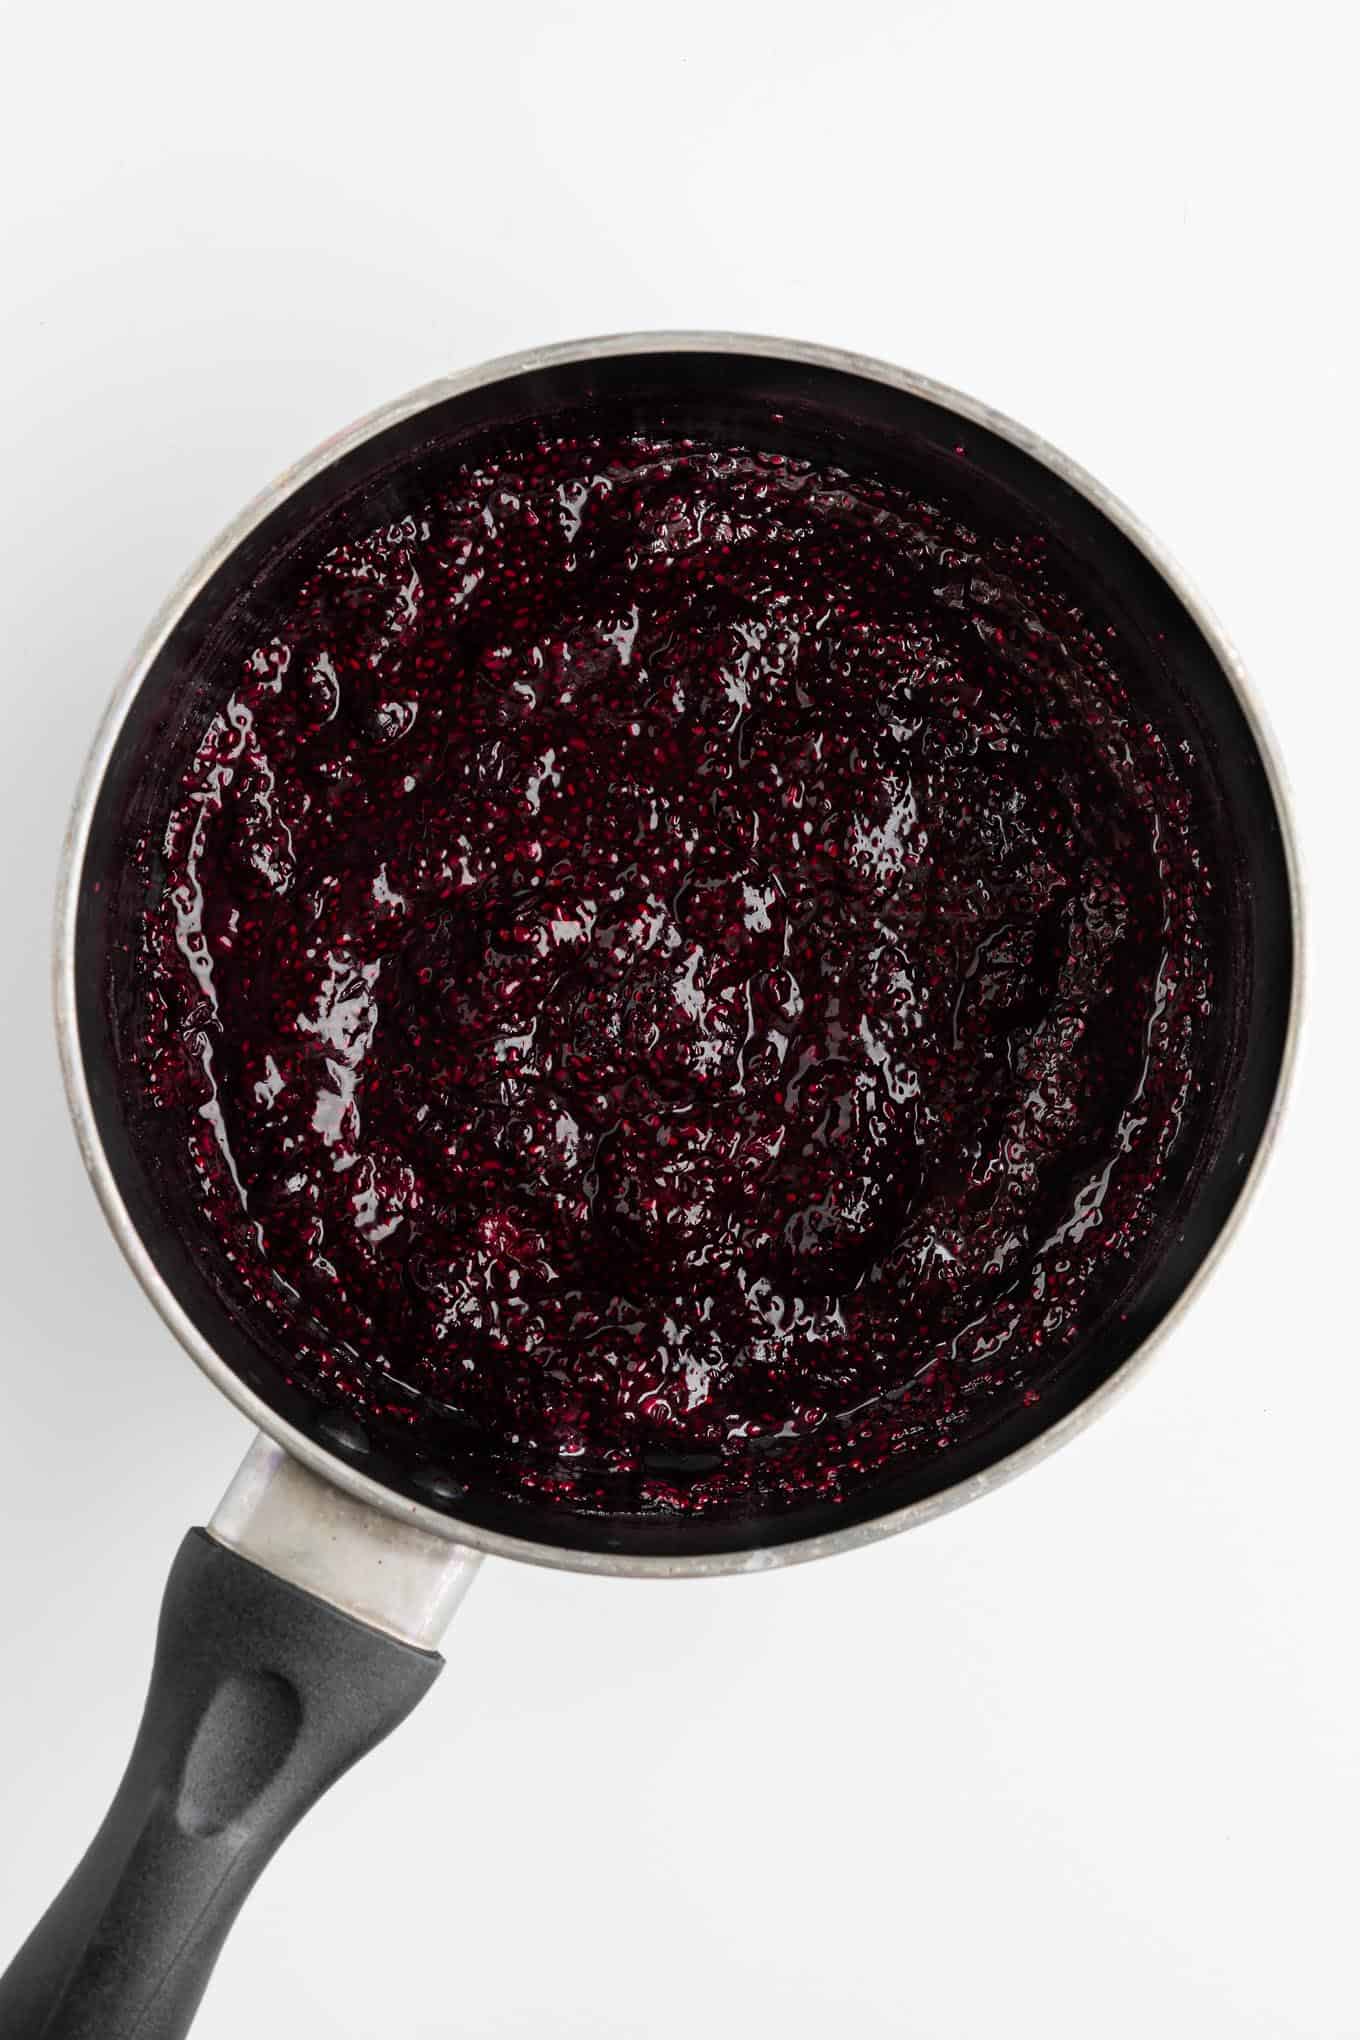 berry chia jam cooked inside a small black sauce pot